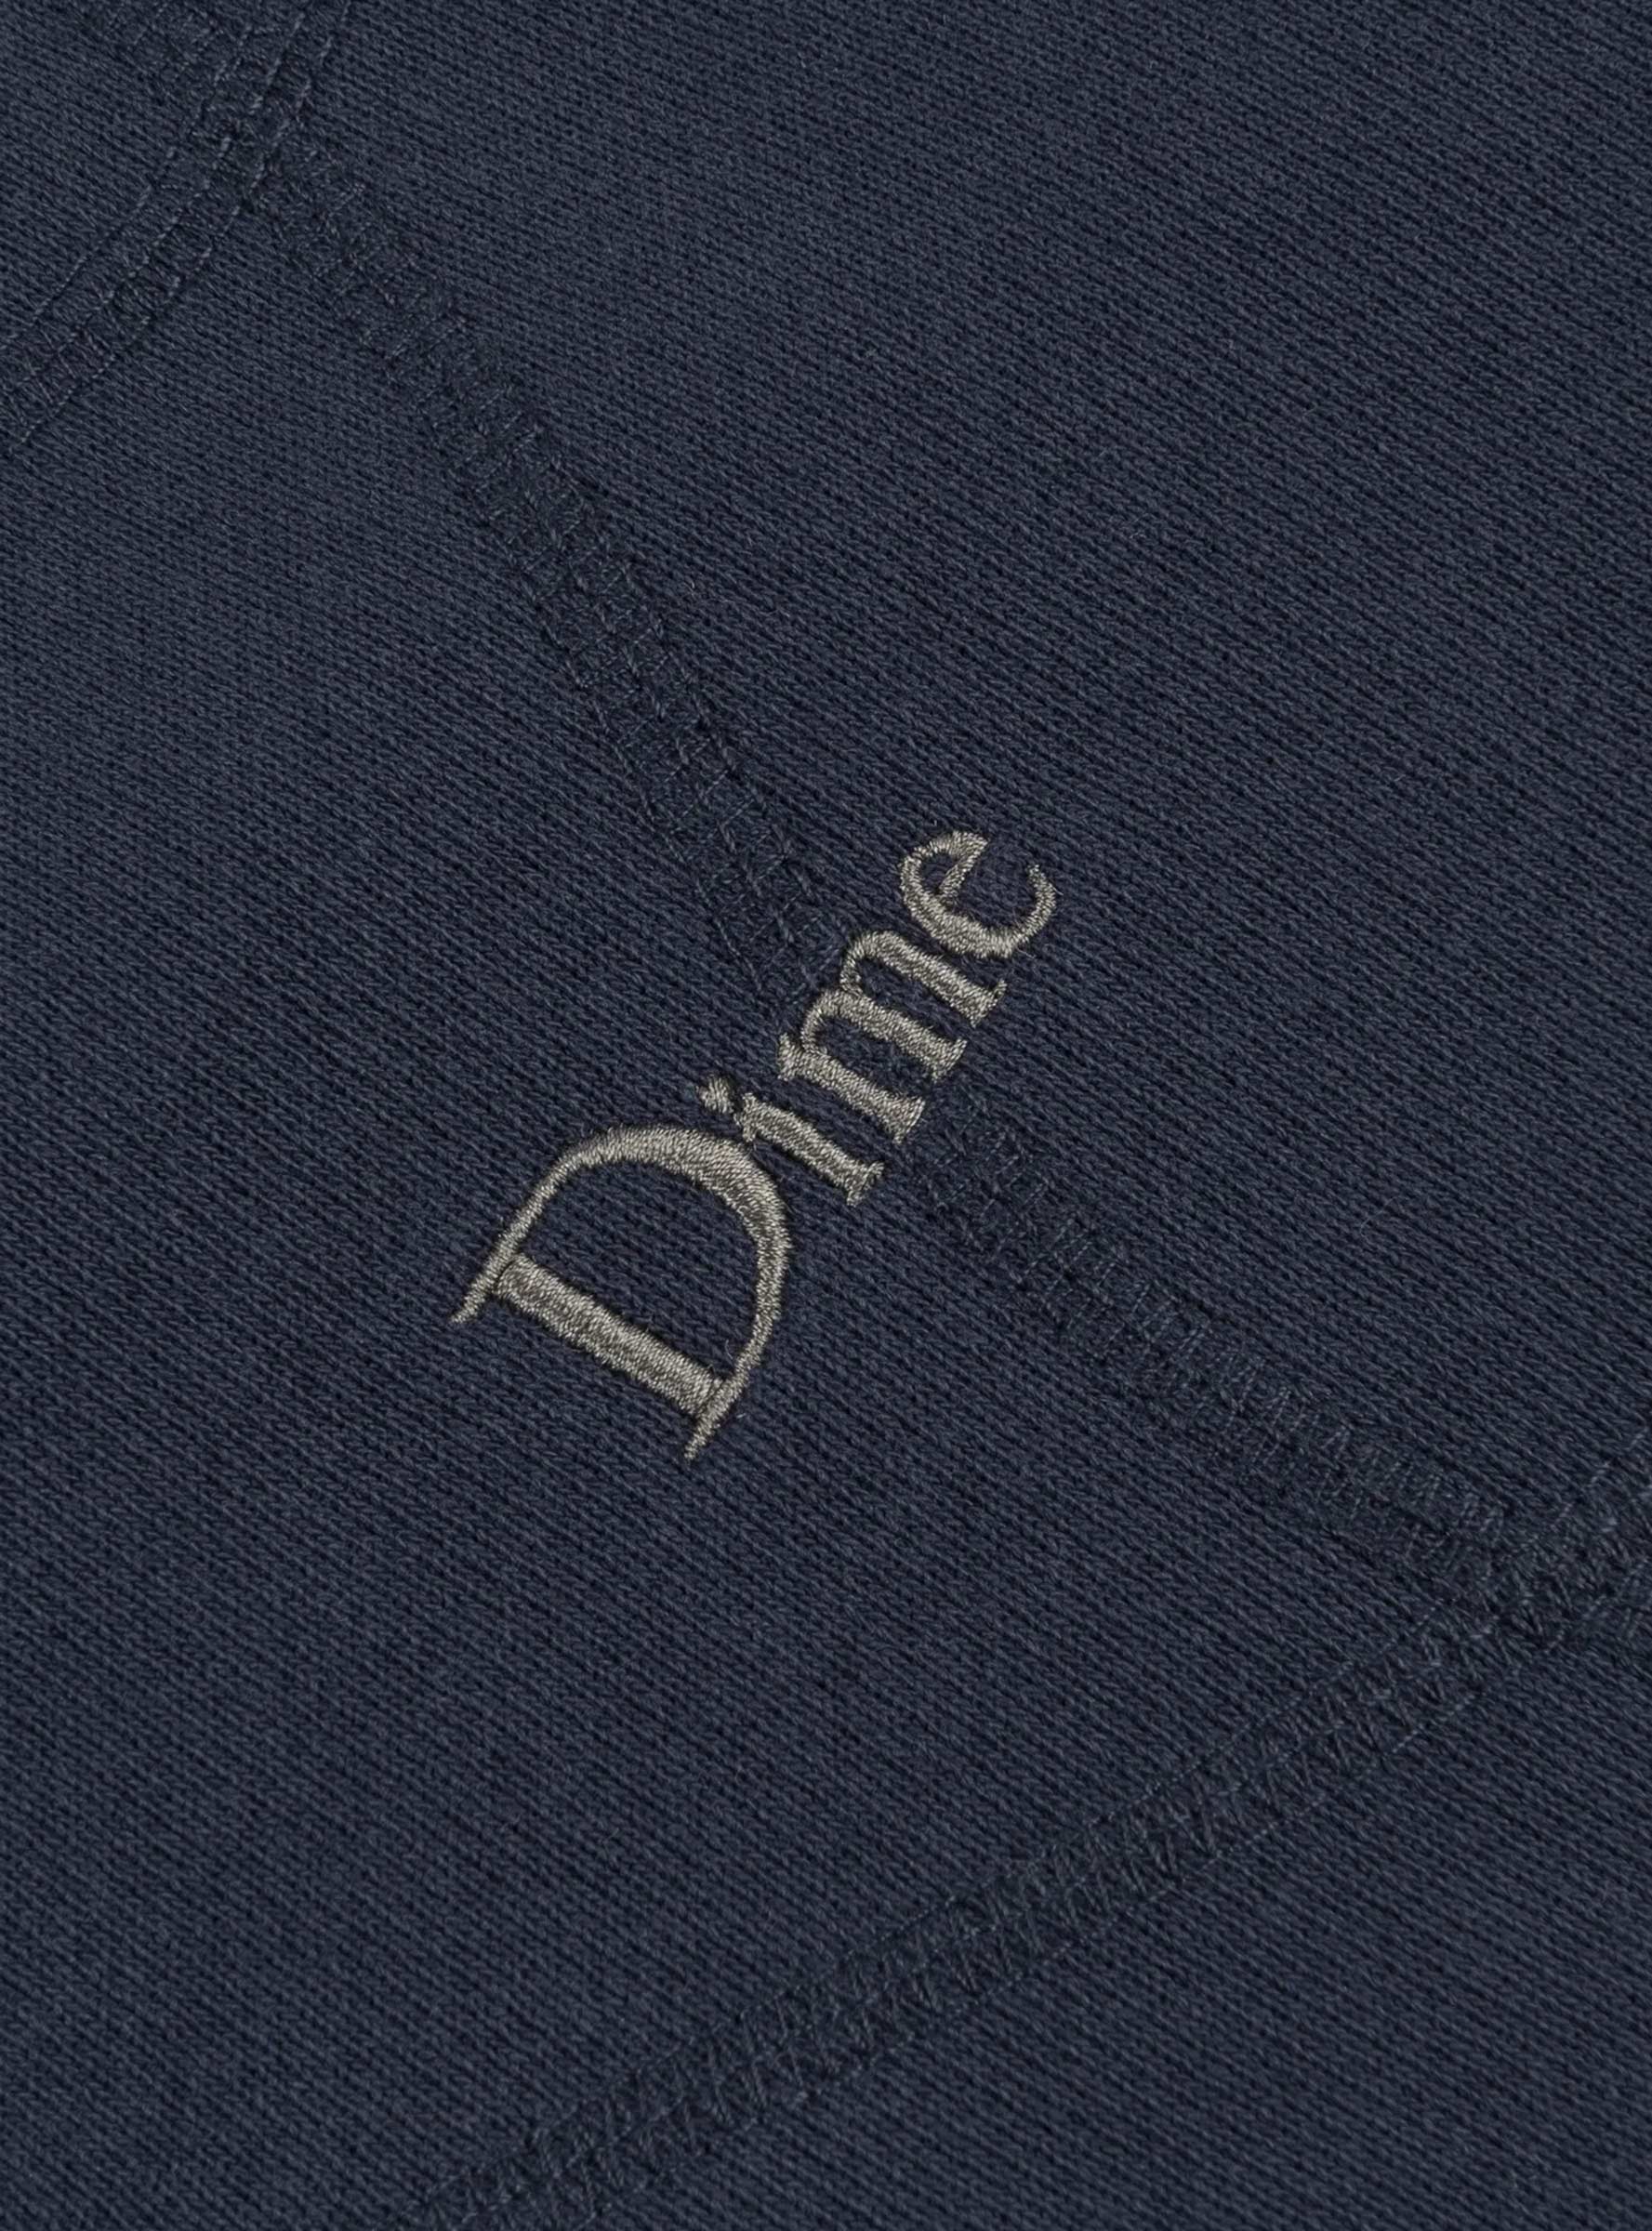  Dime Wave Rugby Sweater Navy - Size: Medium